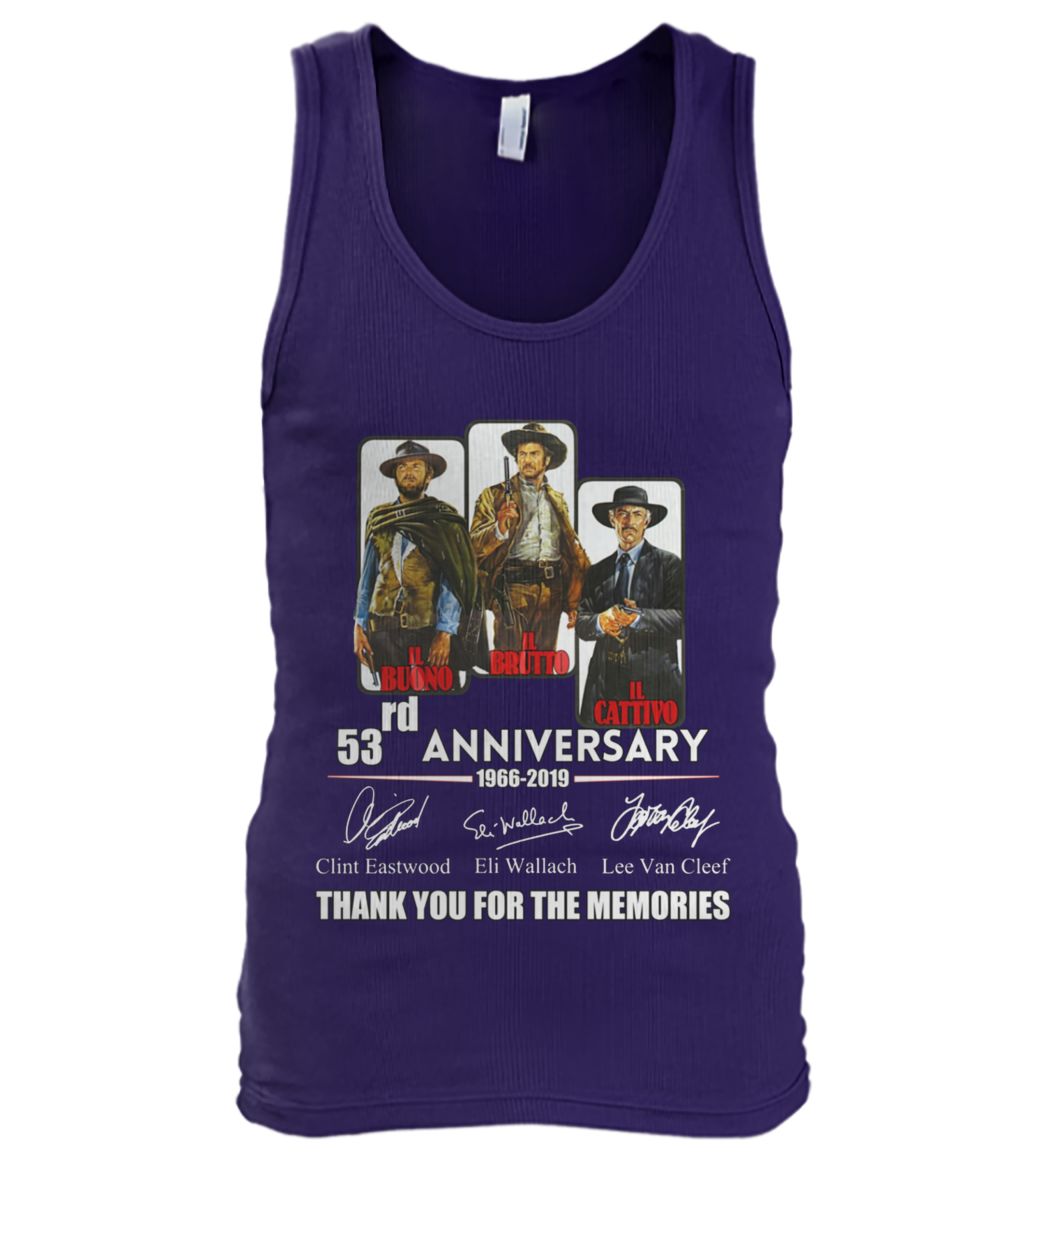 The good the bad and the ugly 53rd anniversary 1966 2019 men's tank top